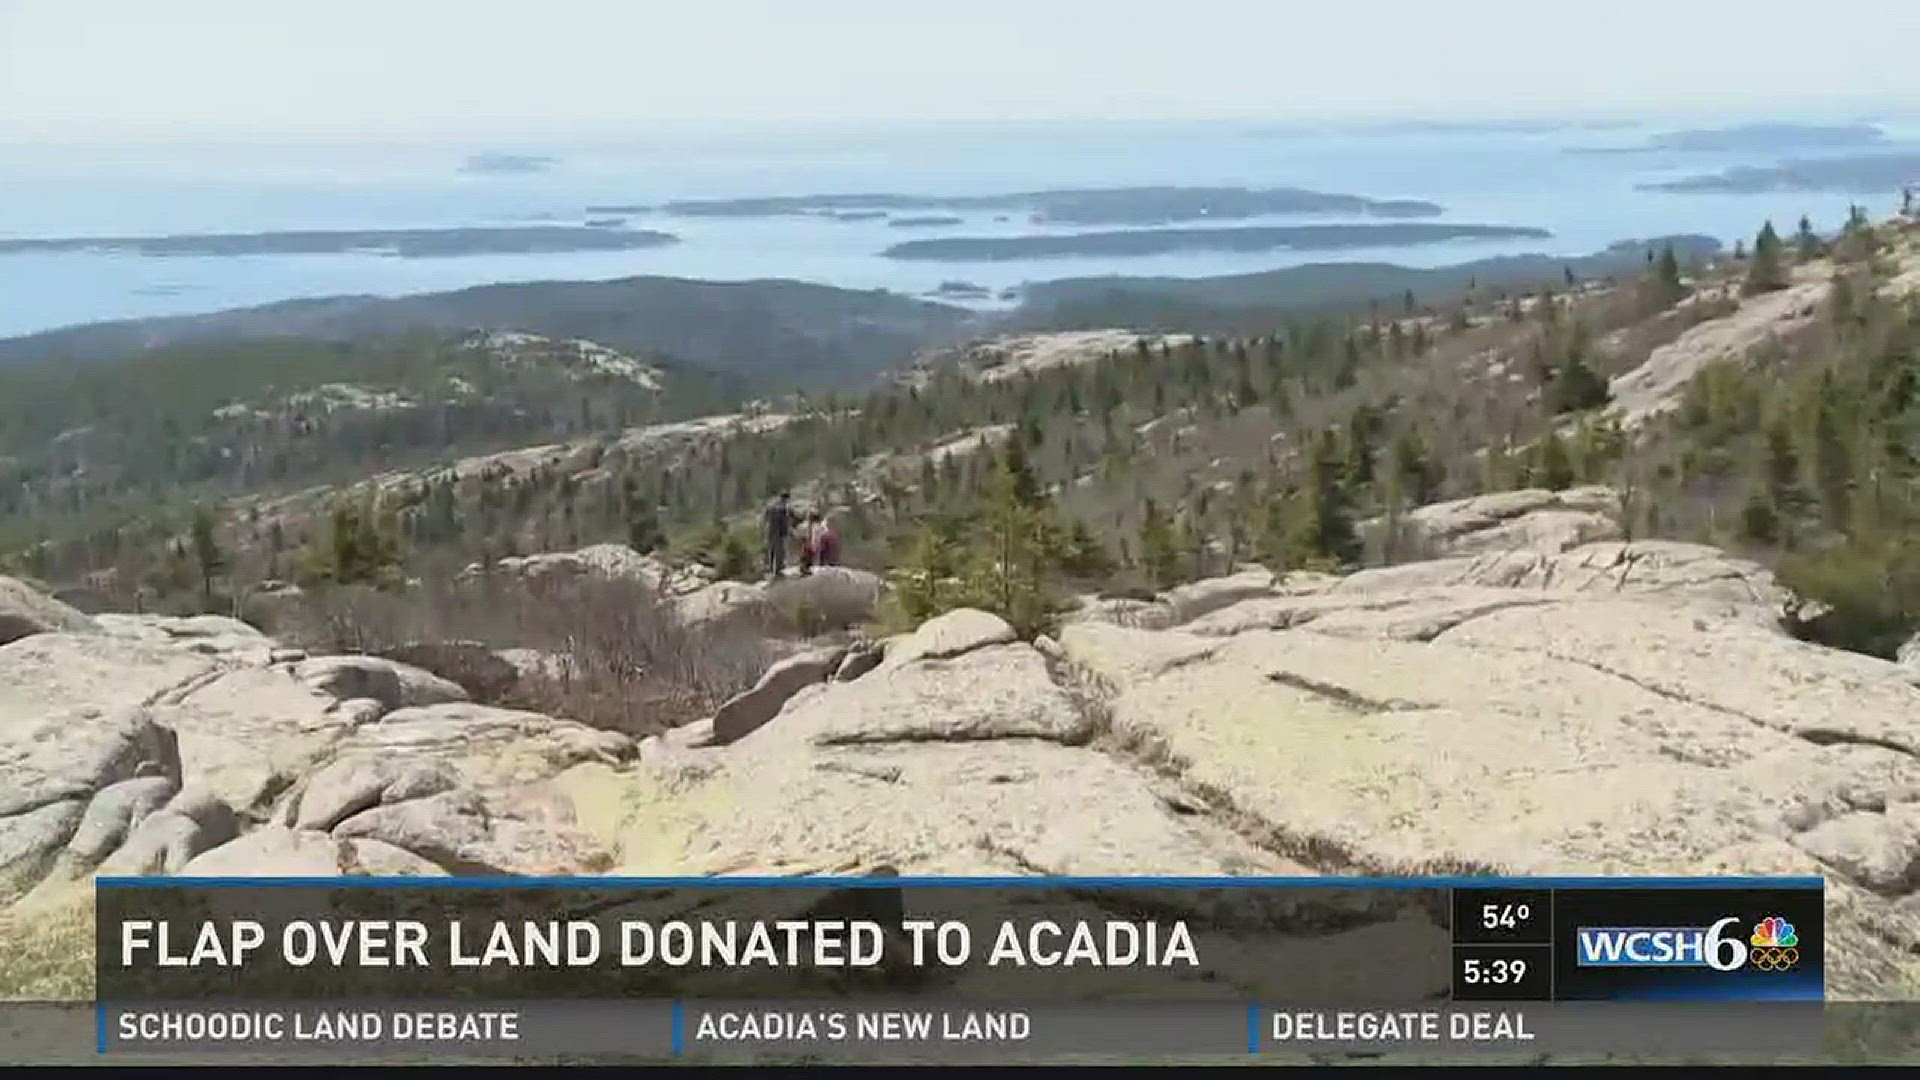 Land donated to Acadia needs to be approved by Congress.